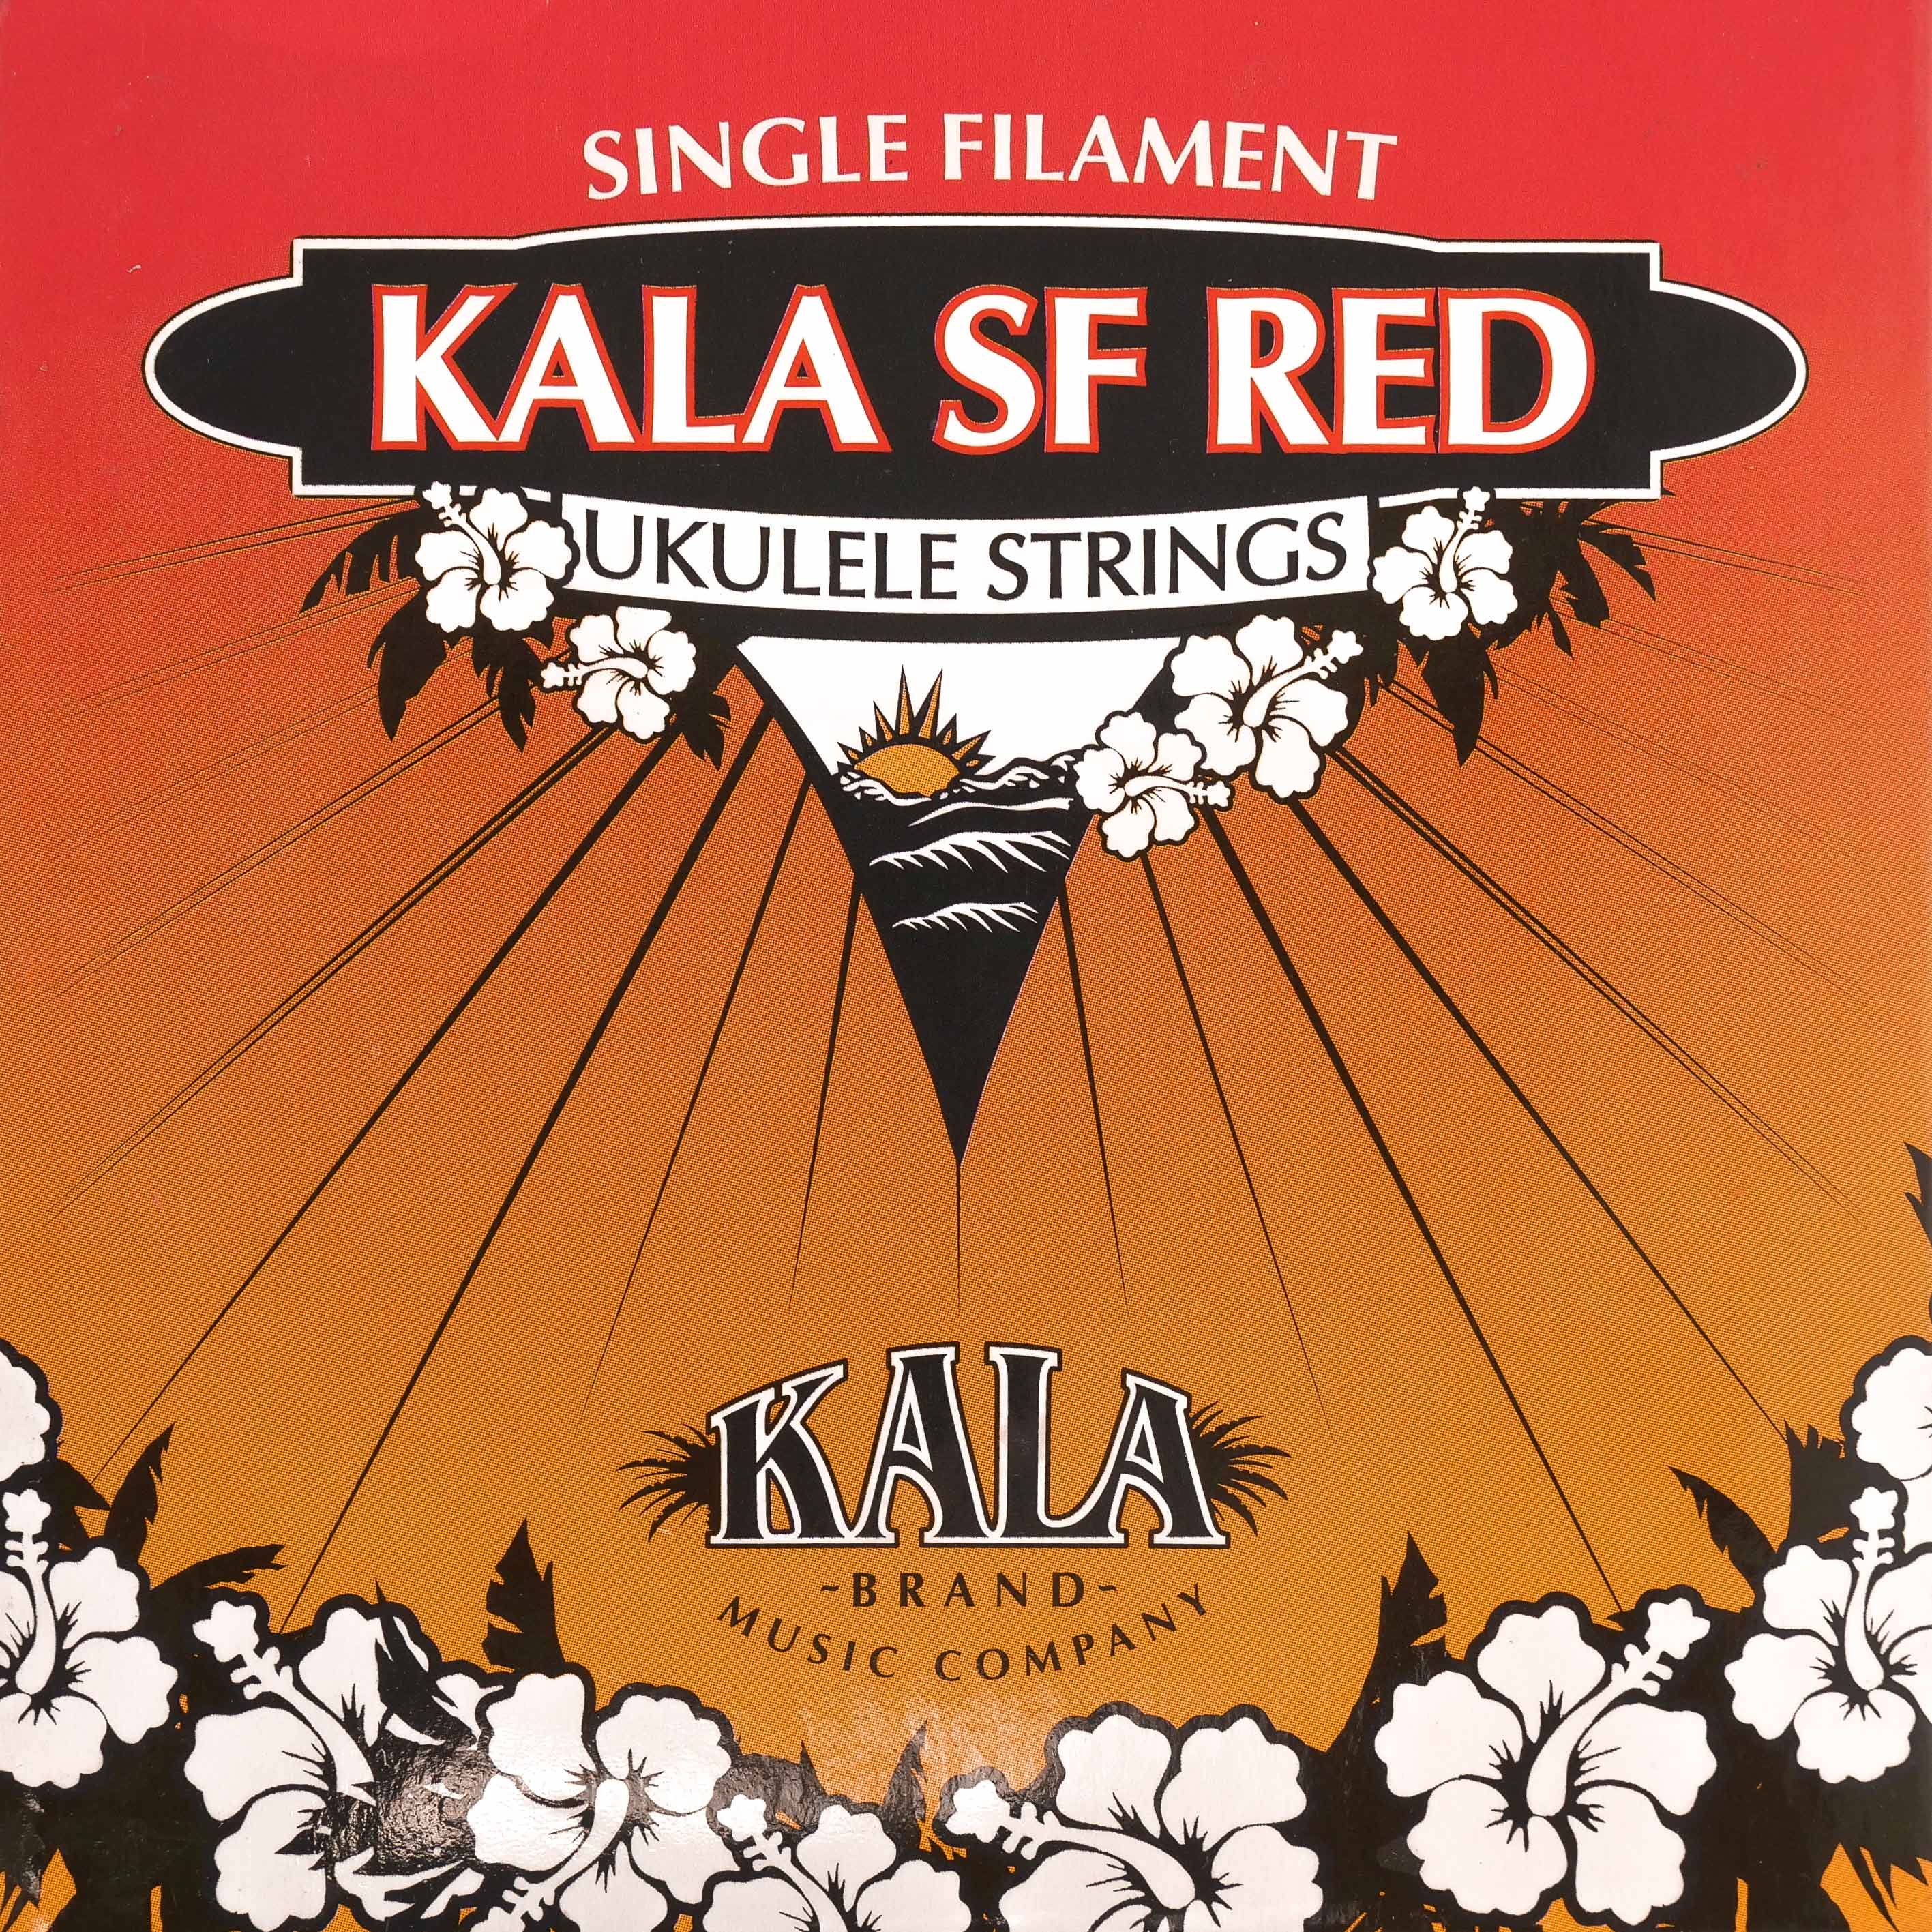 Kala KRSF-CLG Concert Single Filament Silverplated Red Ukulele Strings WOUND LOW G